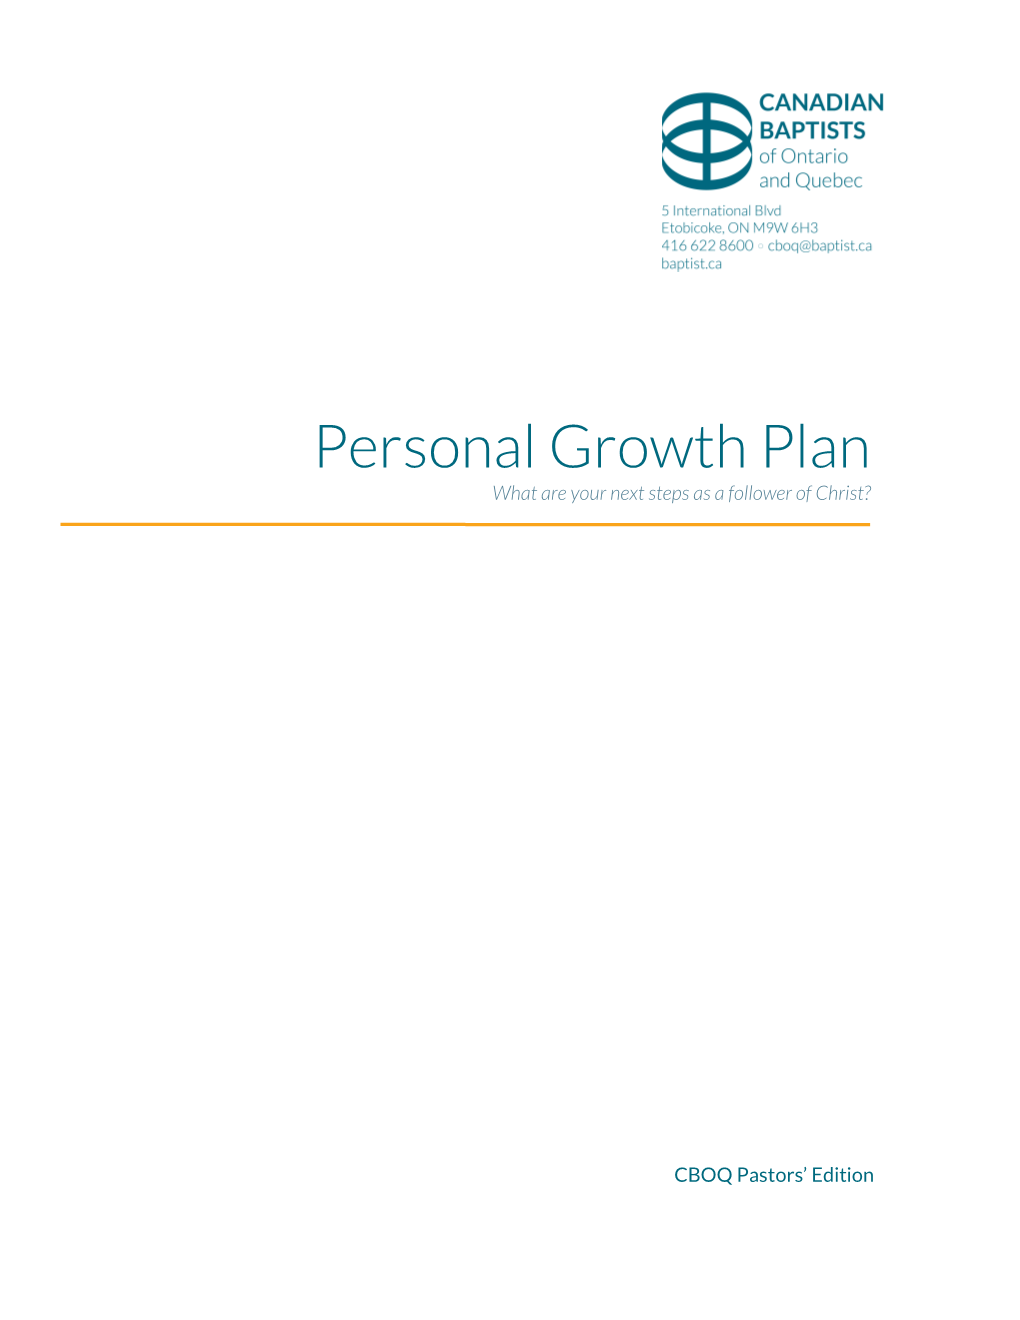 Personal Growth Plan What Are Your Next Steps As a Follower of Christ?